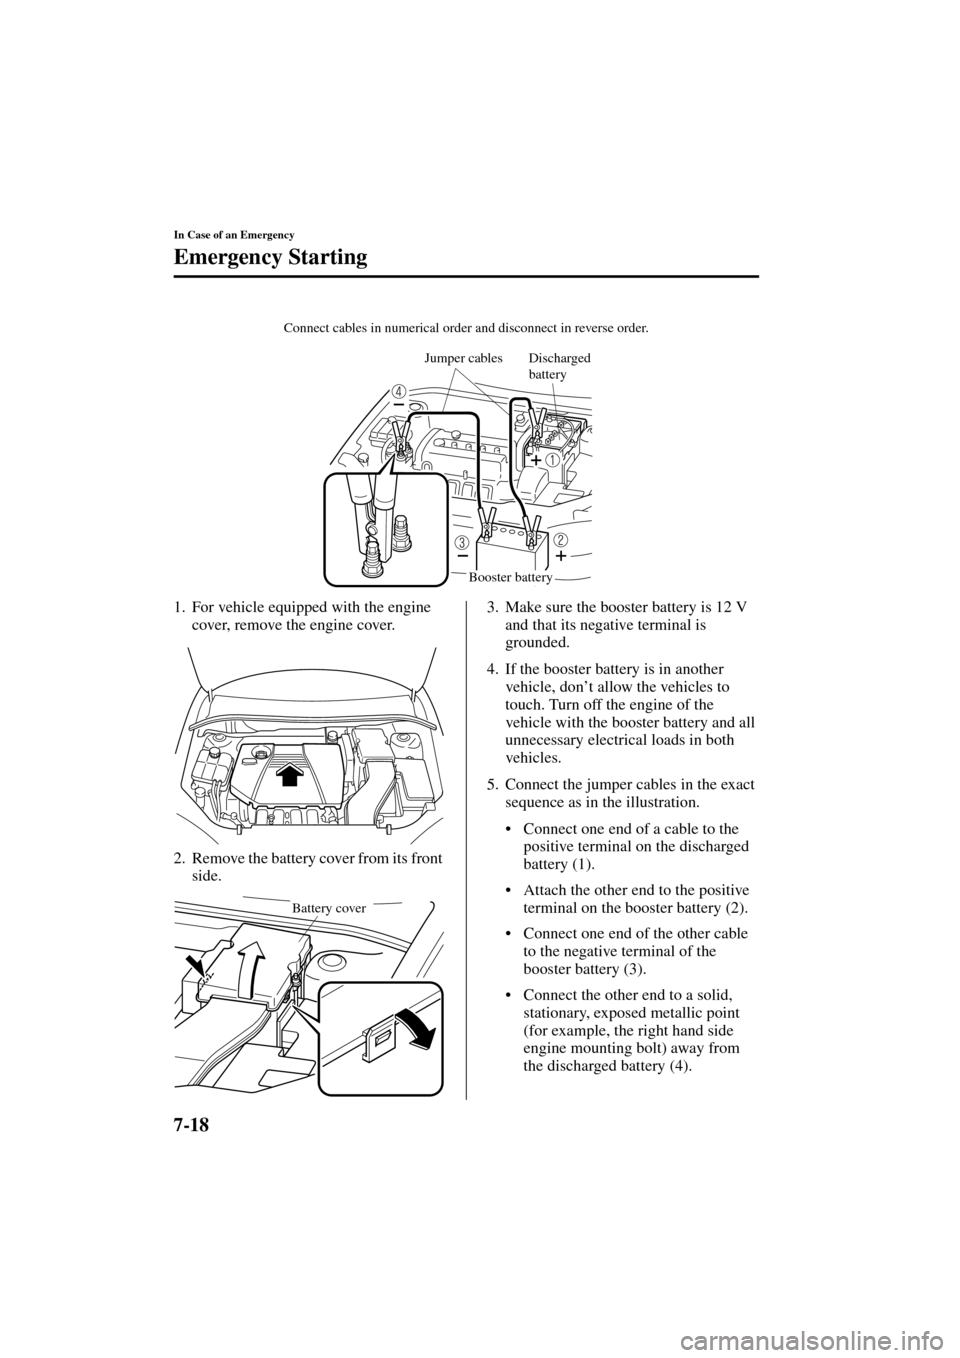 MAZDA MODEL 3 HATCHBACK 2004   (in English) User Guide 7-18
In Case of an Emergency
Emergency Starting
Form No. 8S18-EA-03I
1. For vehicle equipped with the engine 
cover, remove the engine cover.
2. Remove the battery cover from its front 
side.3. Make s